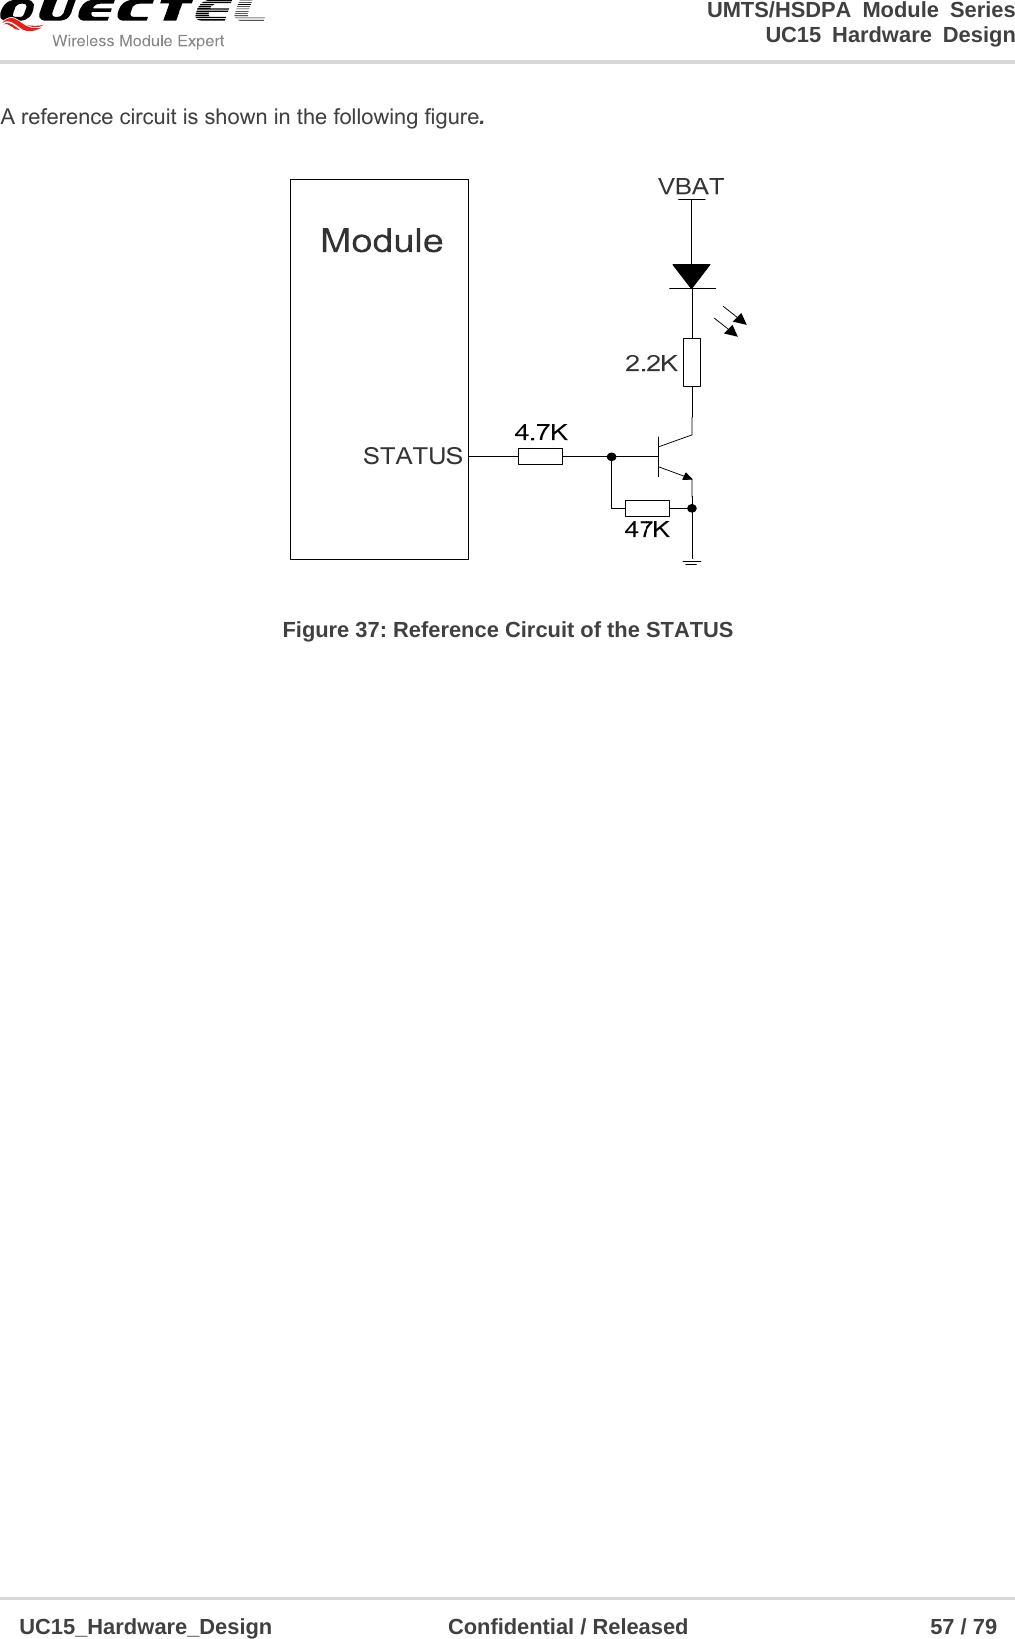                                                                        UMTS/HSDPA Module Series                                                                 UC15 Hardware Design  UC15_Hardware_Design                Confidential / Released                      57 / 79    A reference circuit is shown in the following figure.  Figure 37: Reference Circuit of the STATUS 